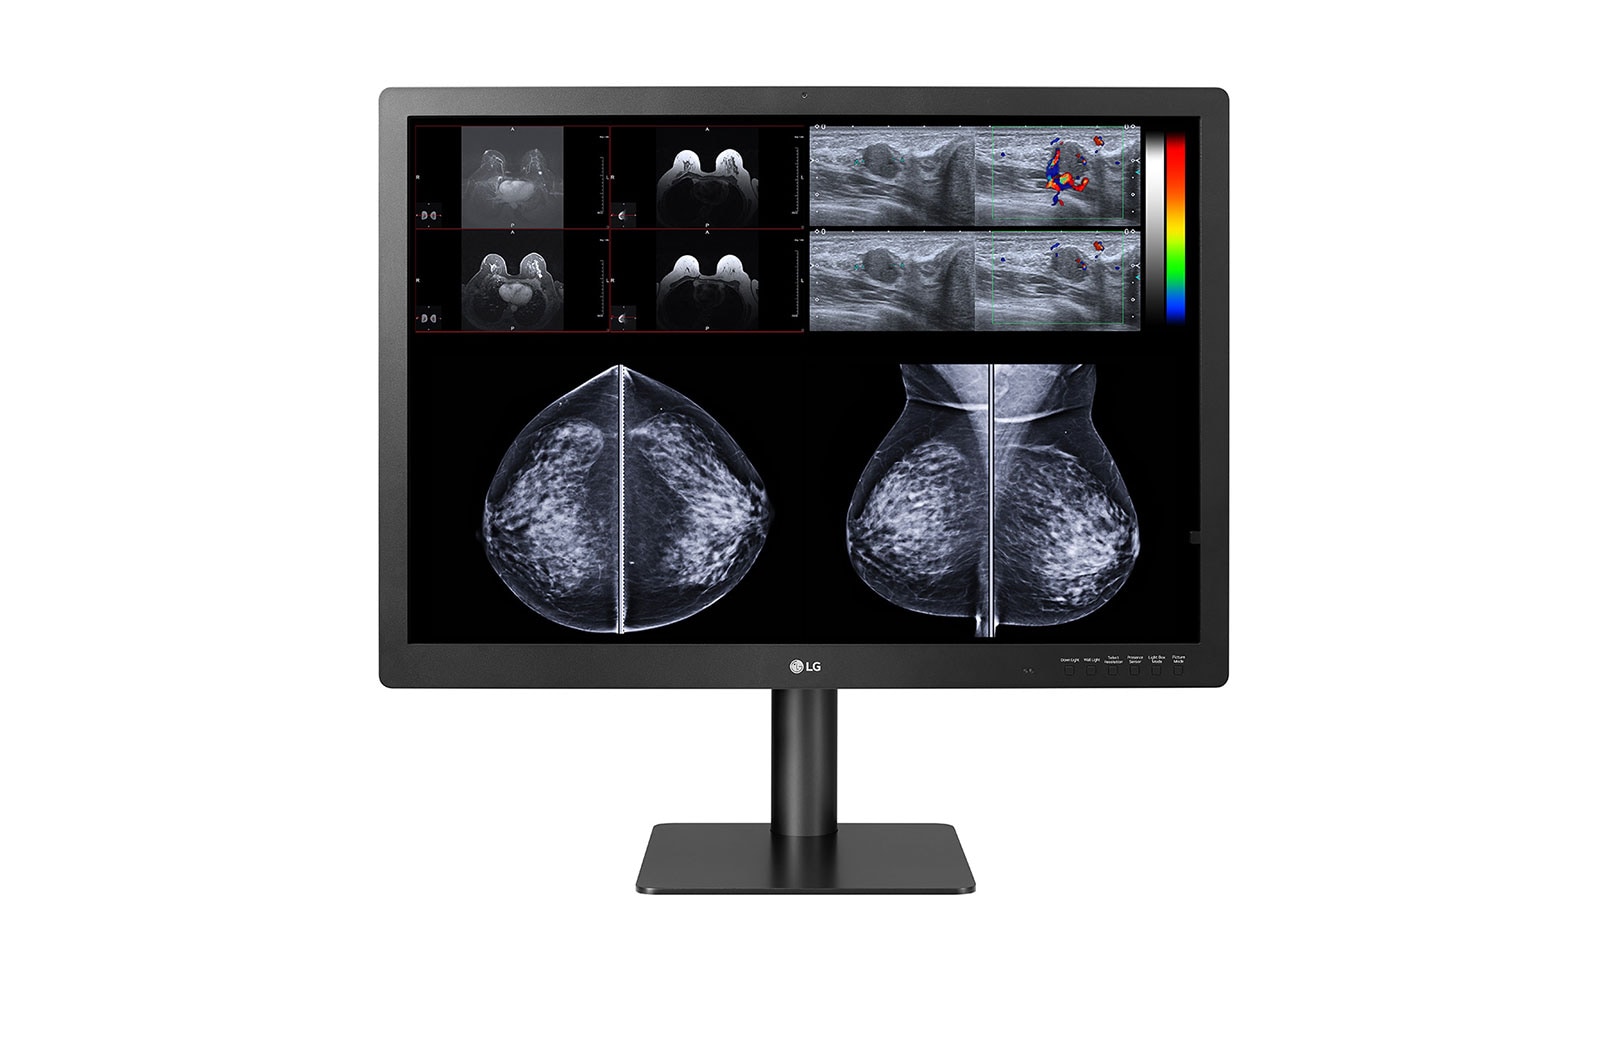 LG 31” 12MP (4200x2800) IPS Diagnostic Monitor for Mammography with Multi-resolution Modes, Pathology Mode, Self-calibration, Focus View, PBP and Dual Controller, 31HN713D-W